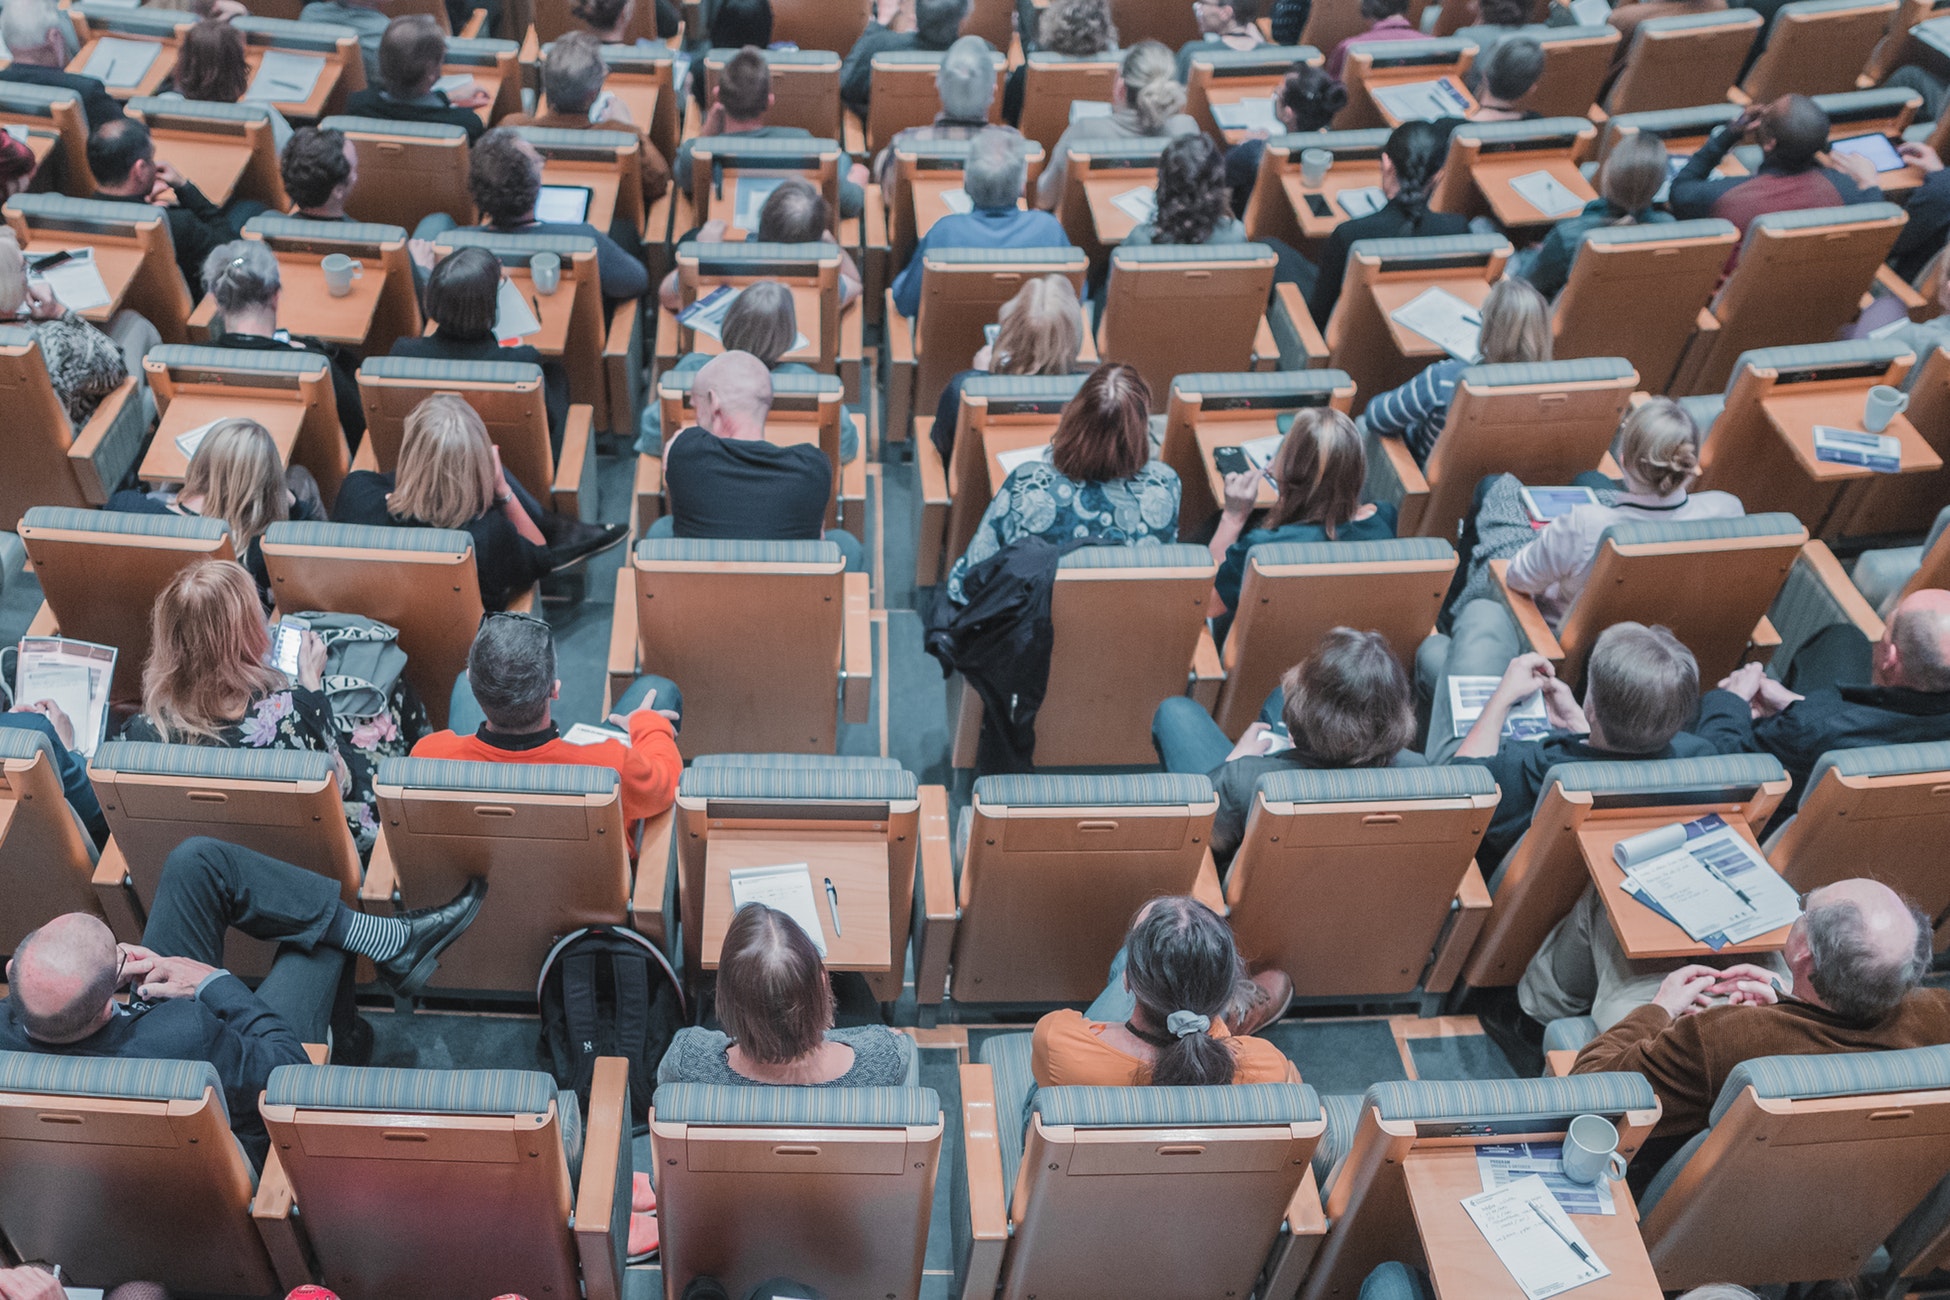 A birds eye view of a lecture hall with people sitting in the chairs.